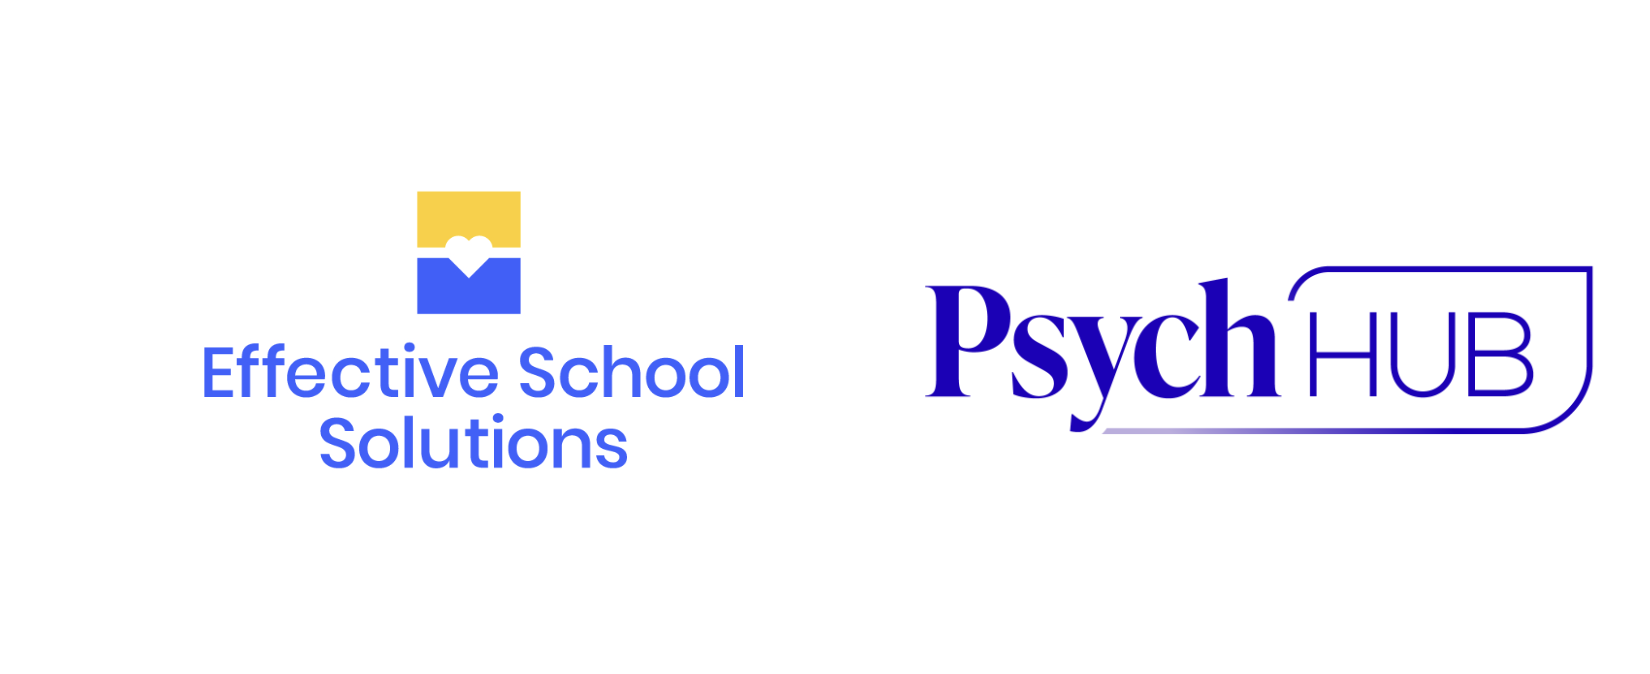 Effective School Solutions and Psych Hub Collaborate to Help Combat Teacher Burnout